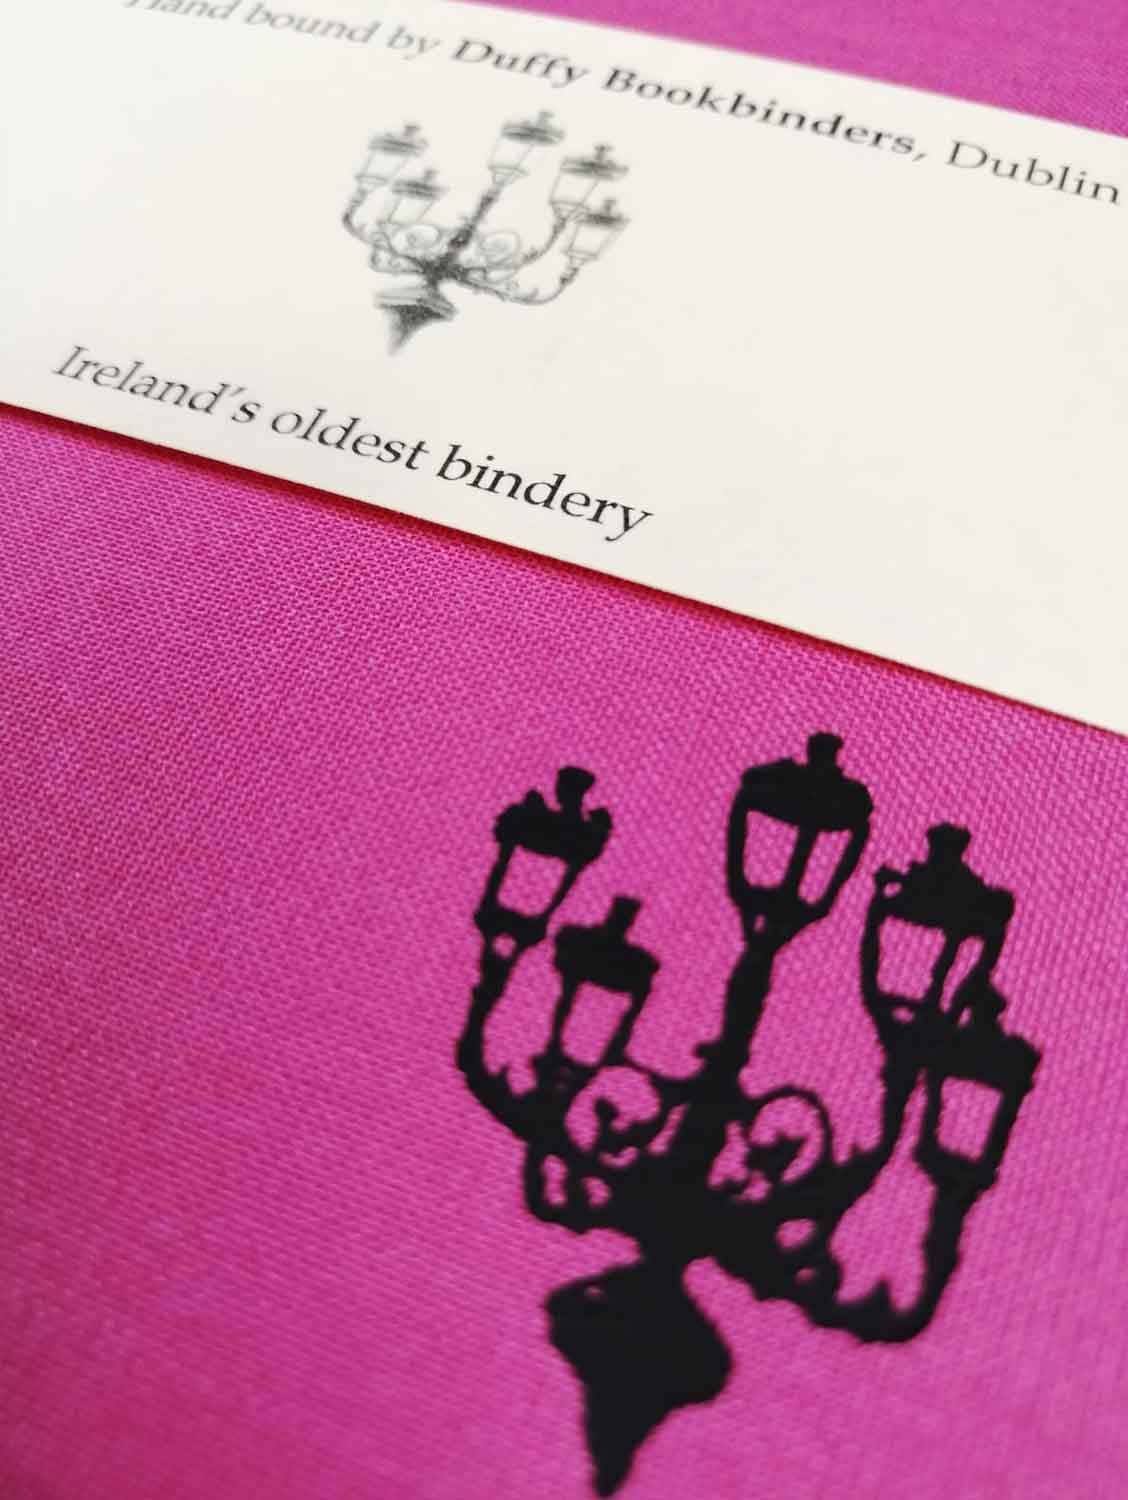 A close up of the lamp illustration also showing the texture of the pink cloth cover.